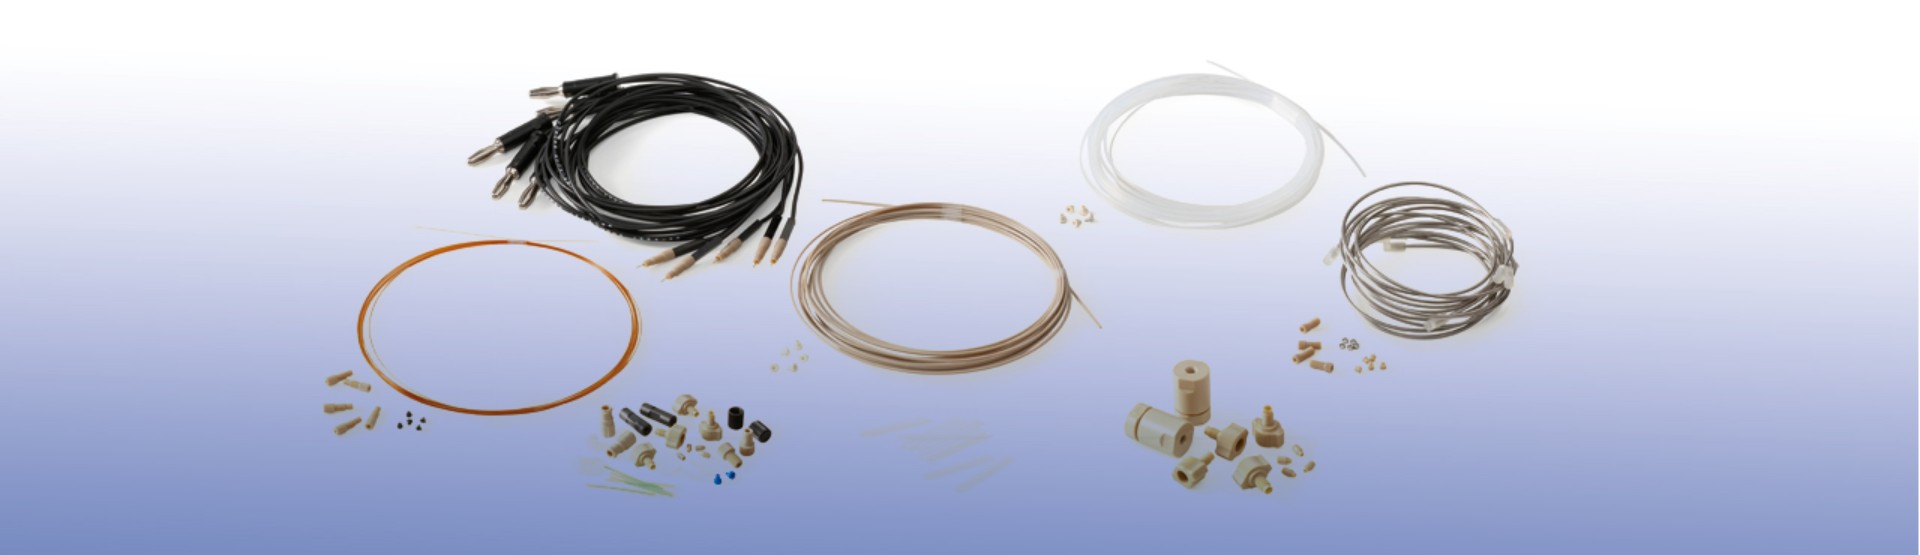 Overview of accessories available in Micronit's web store, e.g. tubing, ferrules, and plugs